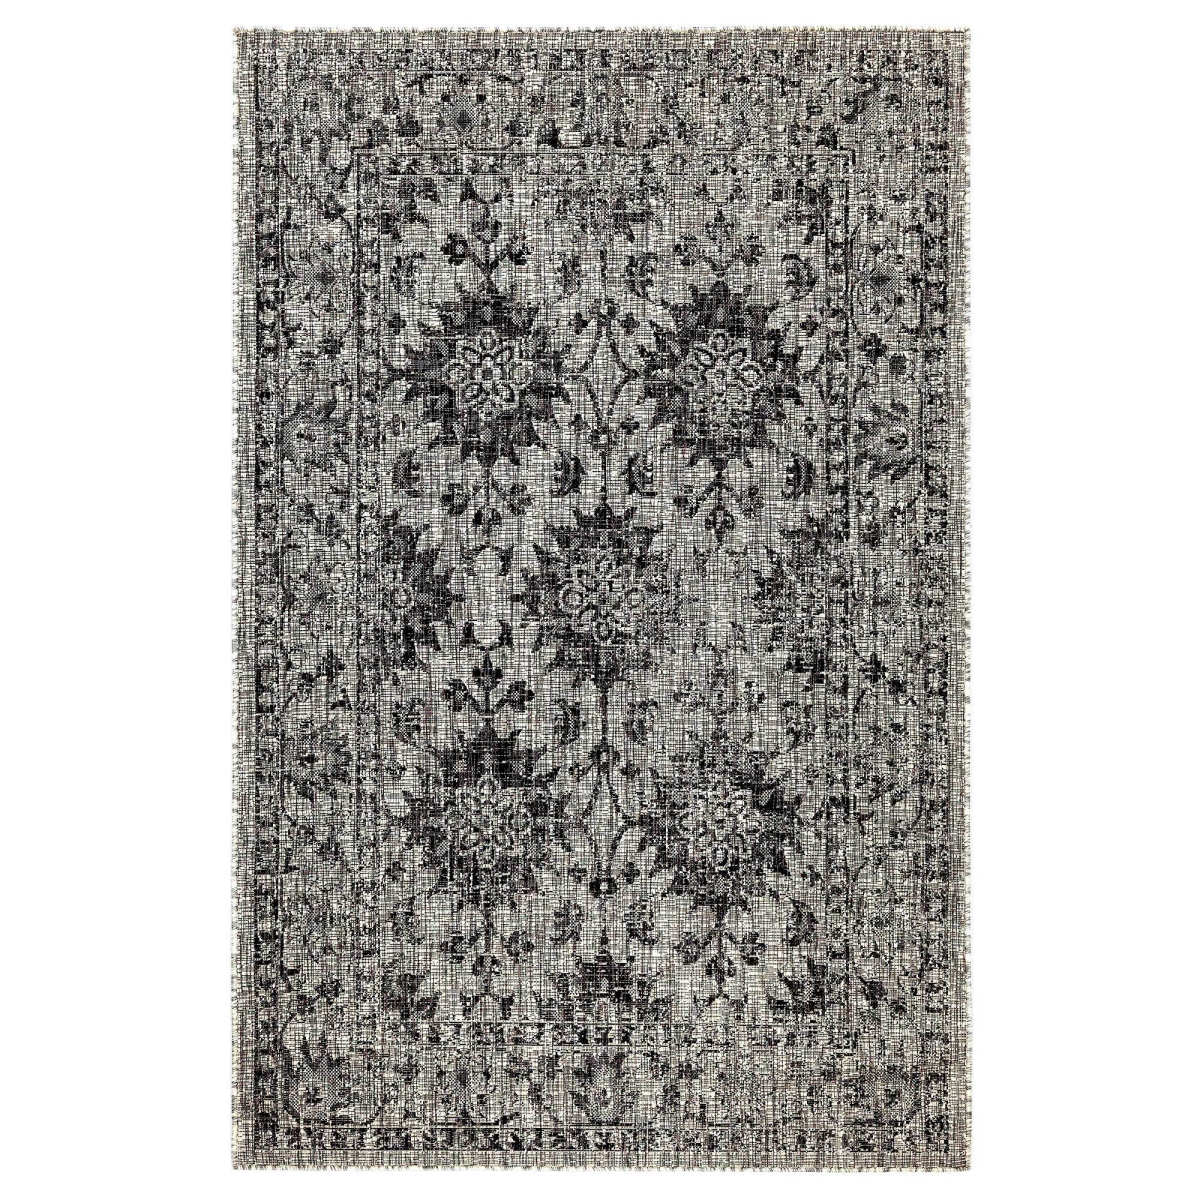 Trans-ocean Imports Cre45841848 39 In. X 59 In. Liora Manne Carmel Vintage Floral Indoor & Outdoor Wilton Woven Rectangle Rug - Black